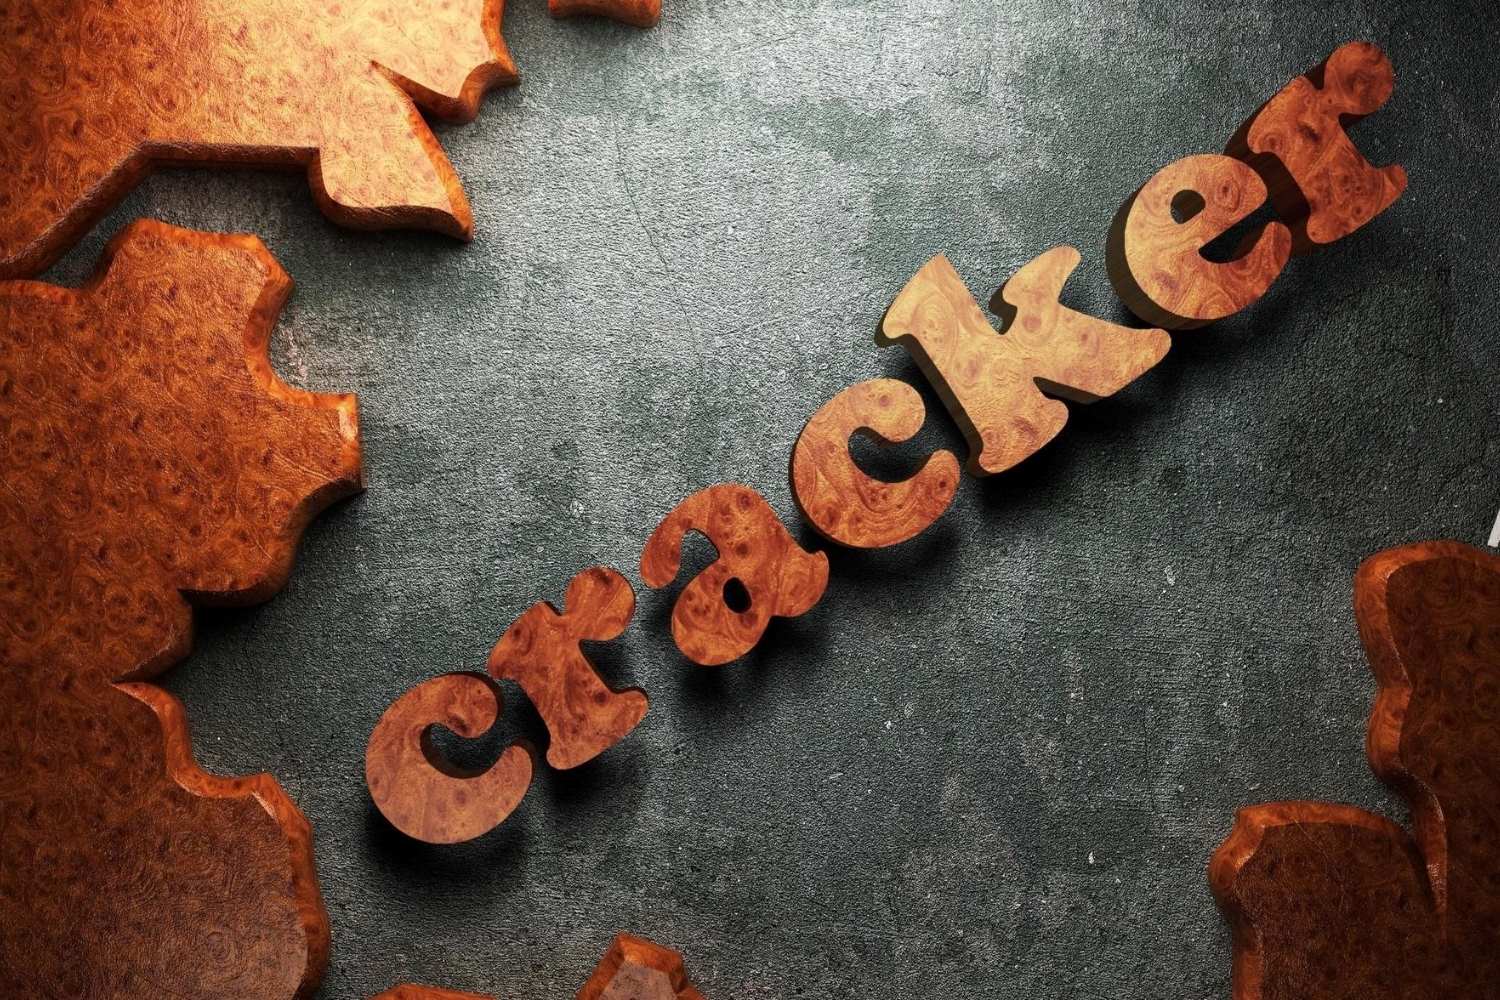 The Surprising Origin Of The Term 'Cracker' And Its Connection To White People